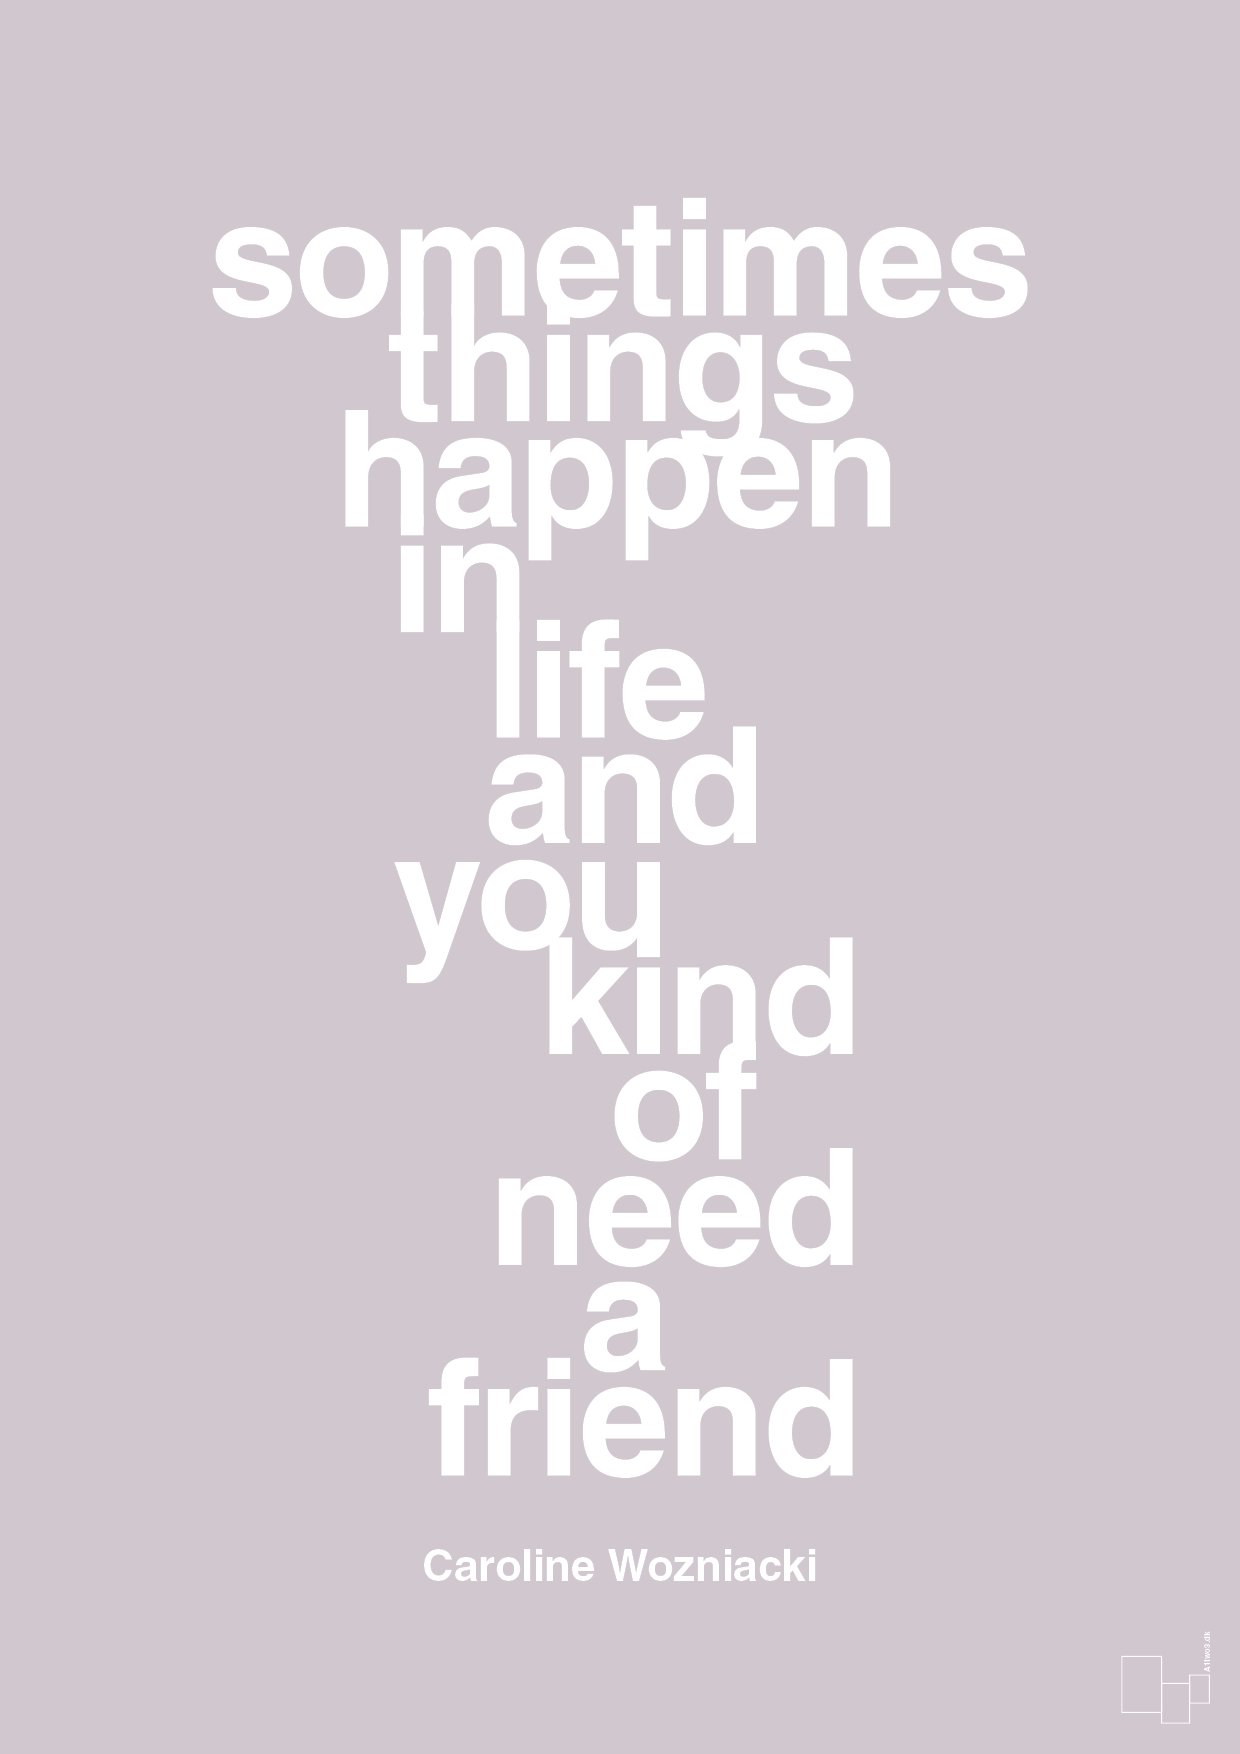 sometimes things happen in life and you kind of need a friend - Plakat med Citater i Dusty Lilac